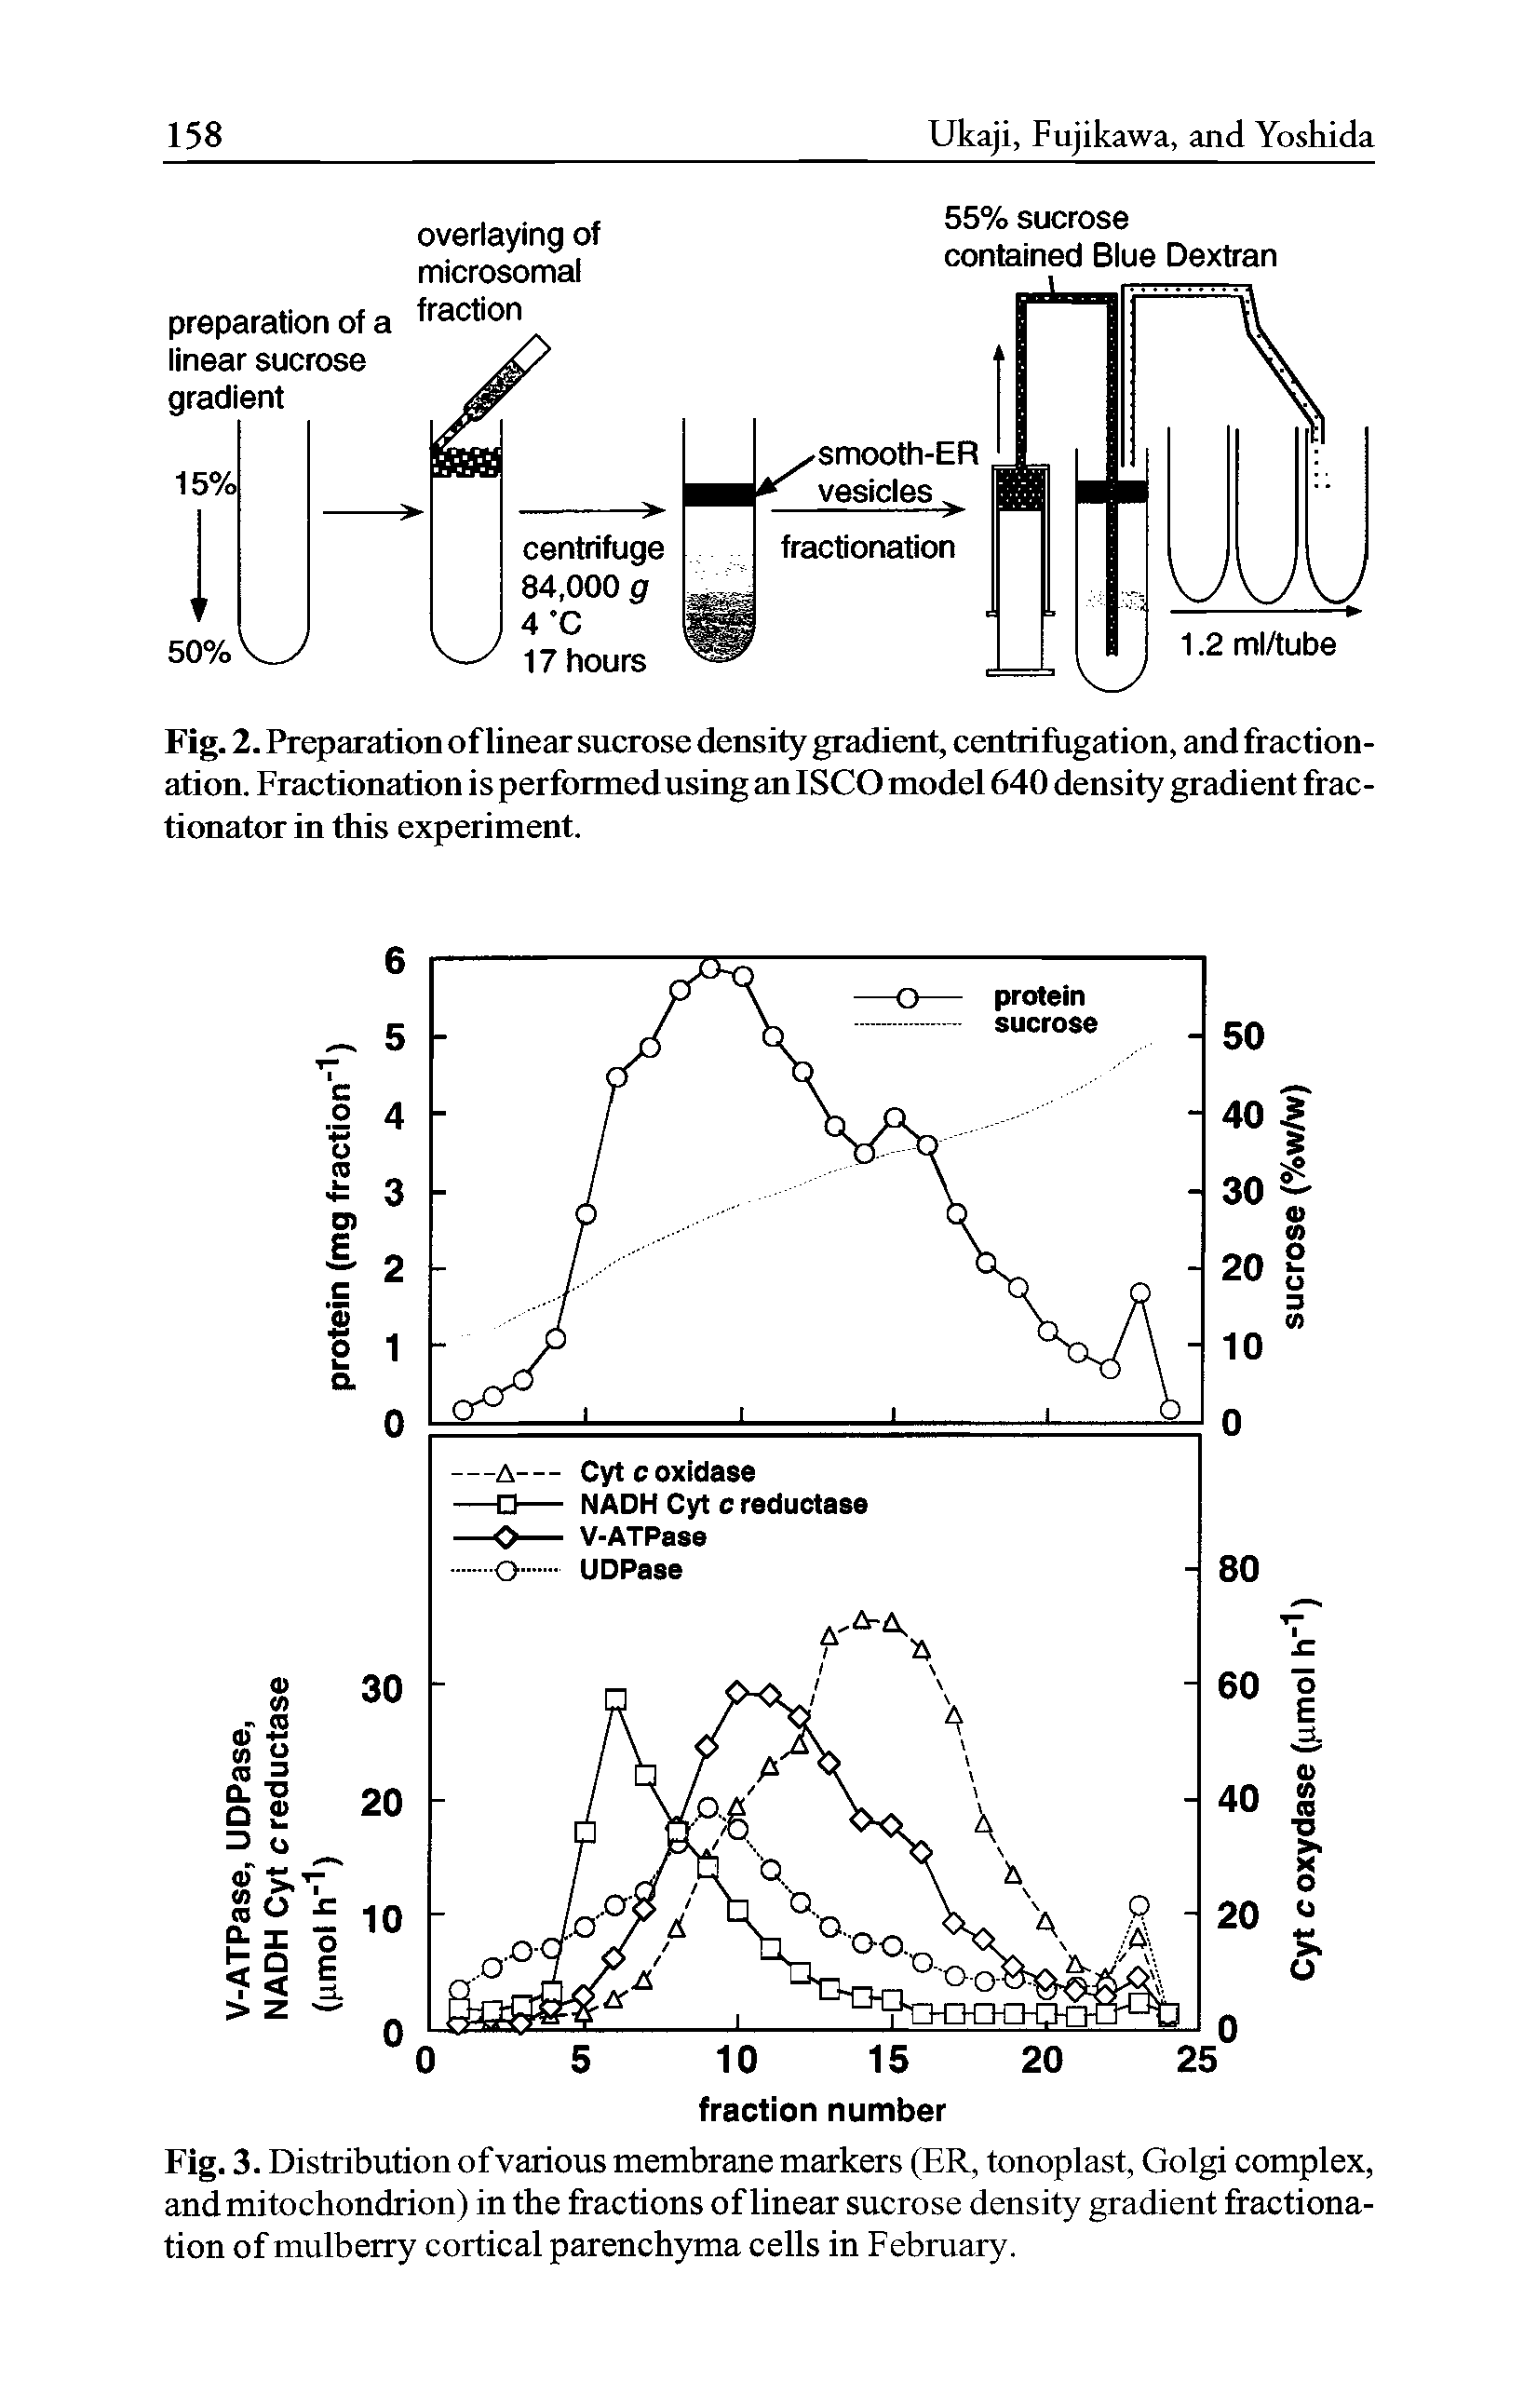 Fig. 2. Preparation of linear sucrose density gradient, centrifugation, and fractionation. Fractionation is performed using an ISCO model 640 density gradient fractionator in this experiment.